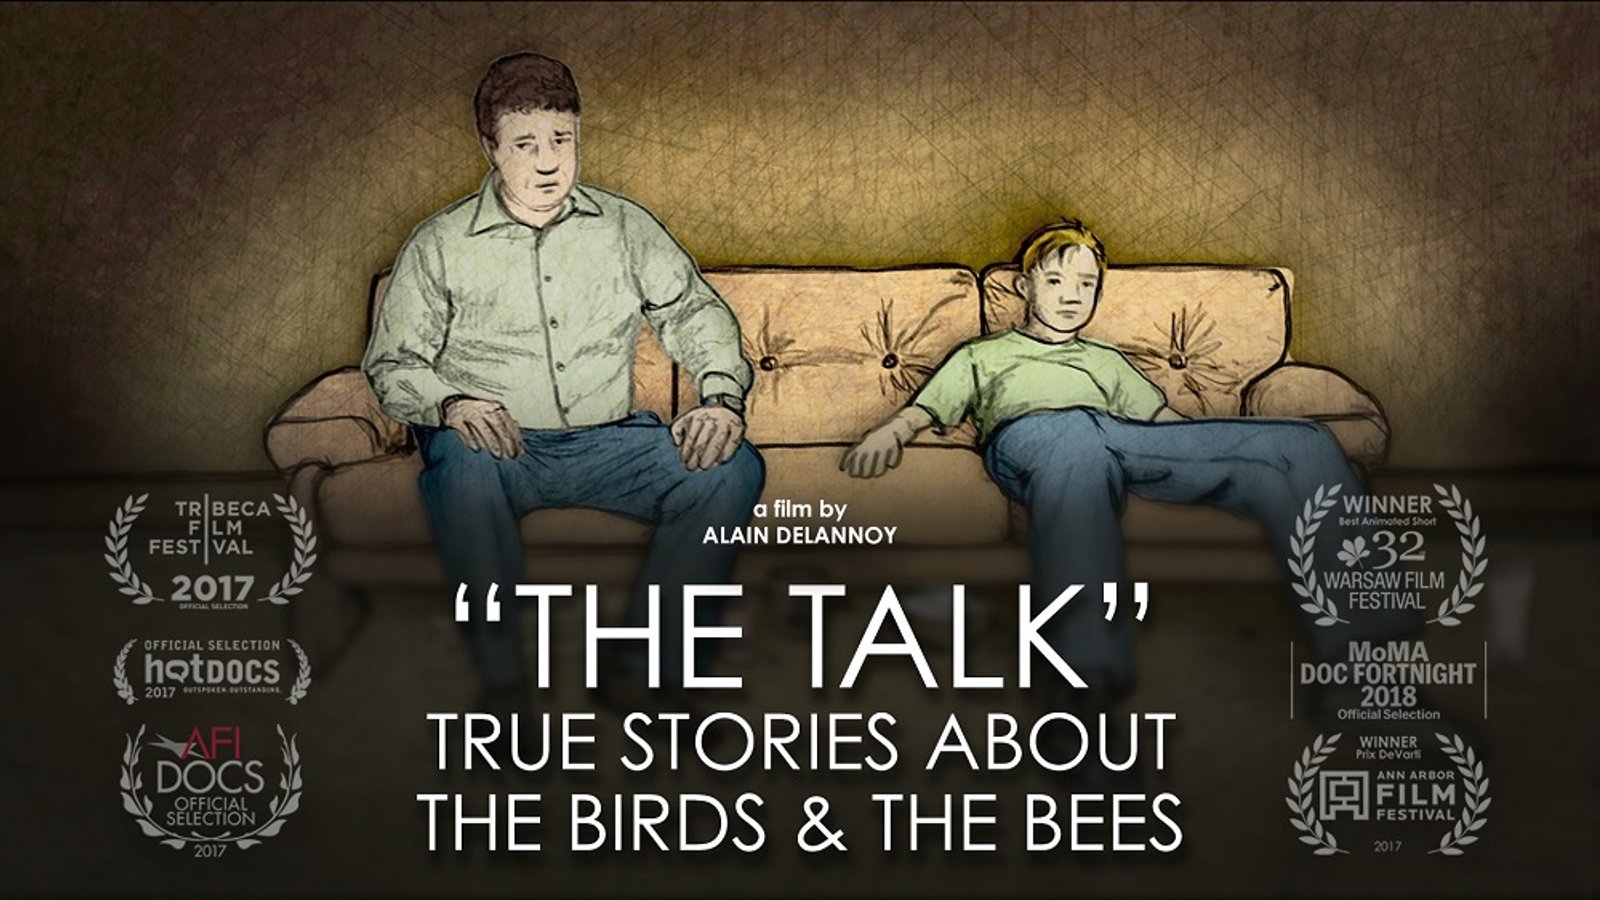 The Talk - True Stories About the Birds and the Bees